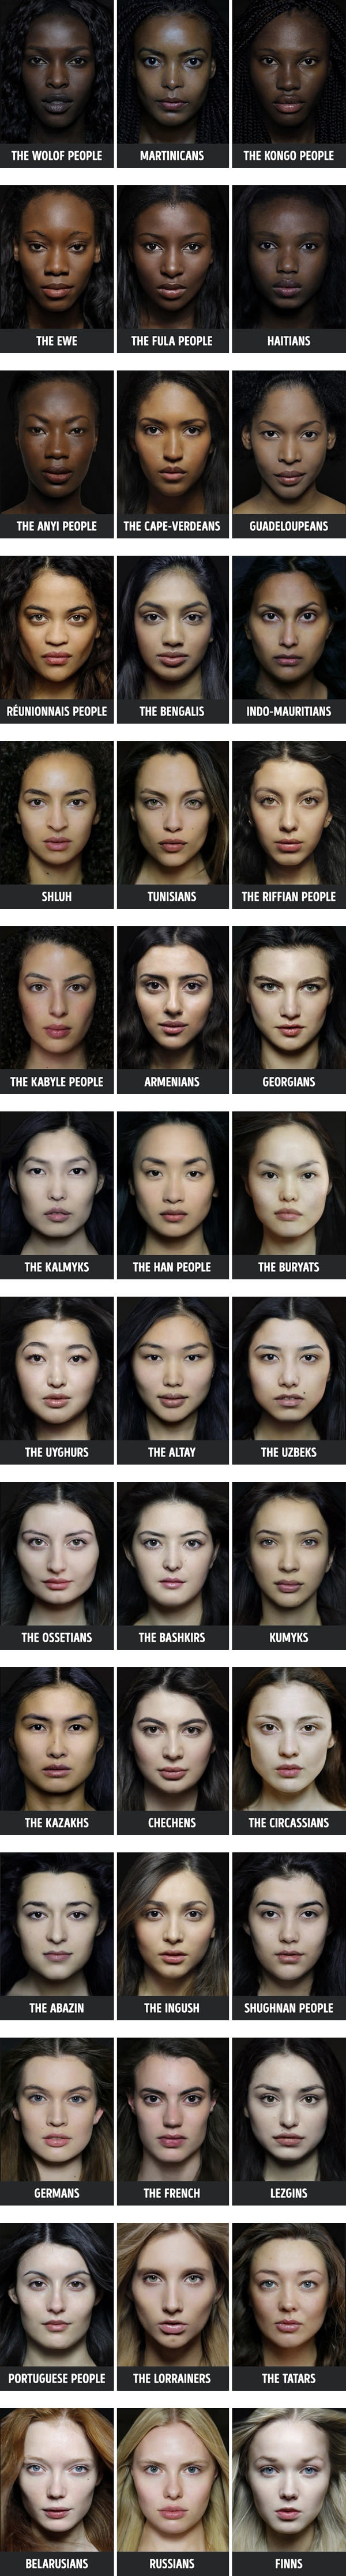 Facial color palettes around the world